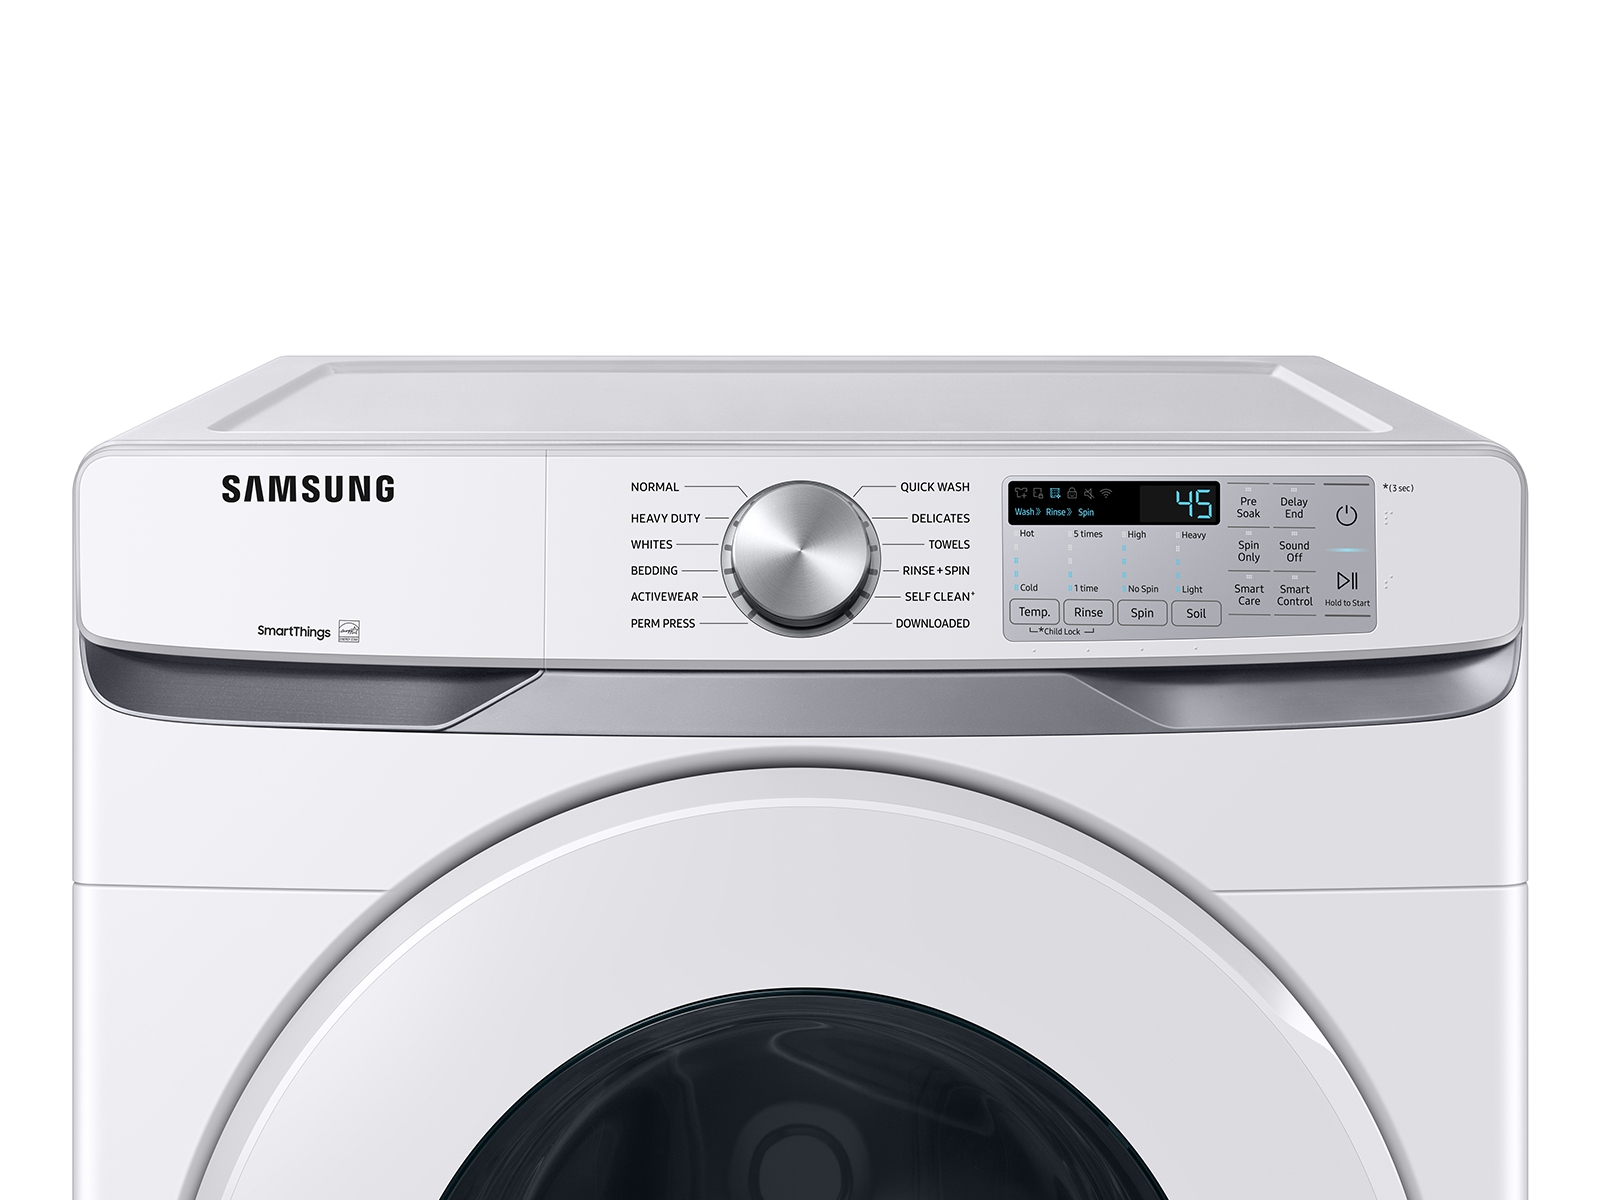 Samsung 5.1 Cu. Ft. High-Efficiency Stackable Smart Front Load Washer with  Vibration Reduction Technology+ Brushed Black WF51CG8000AV - Best Buy